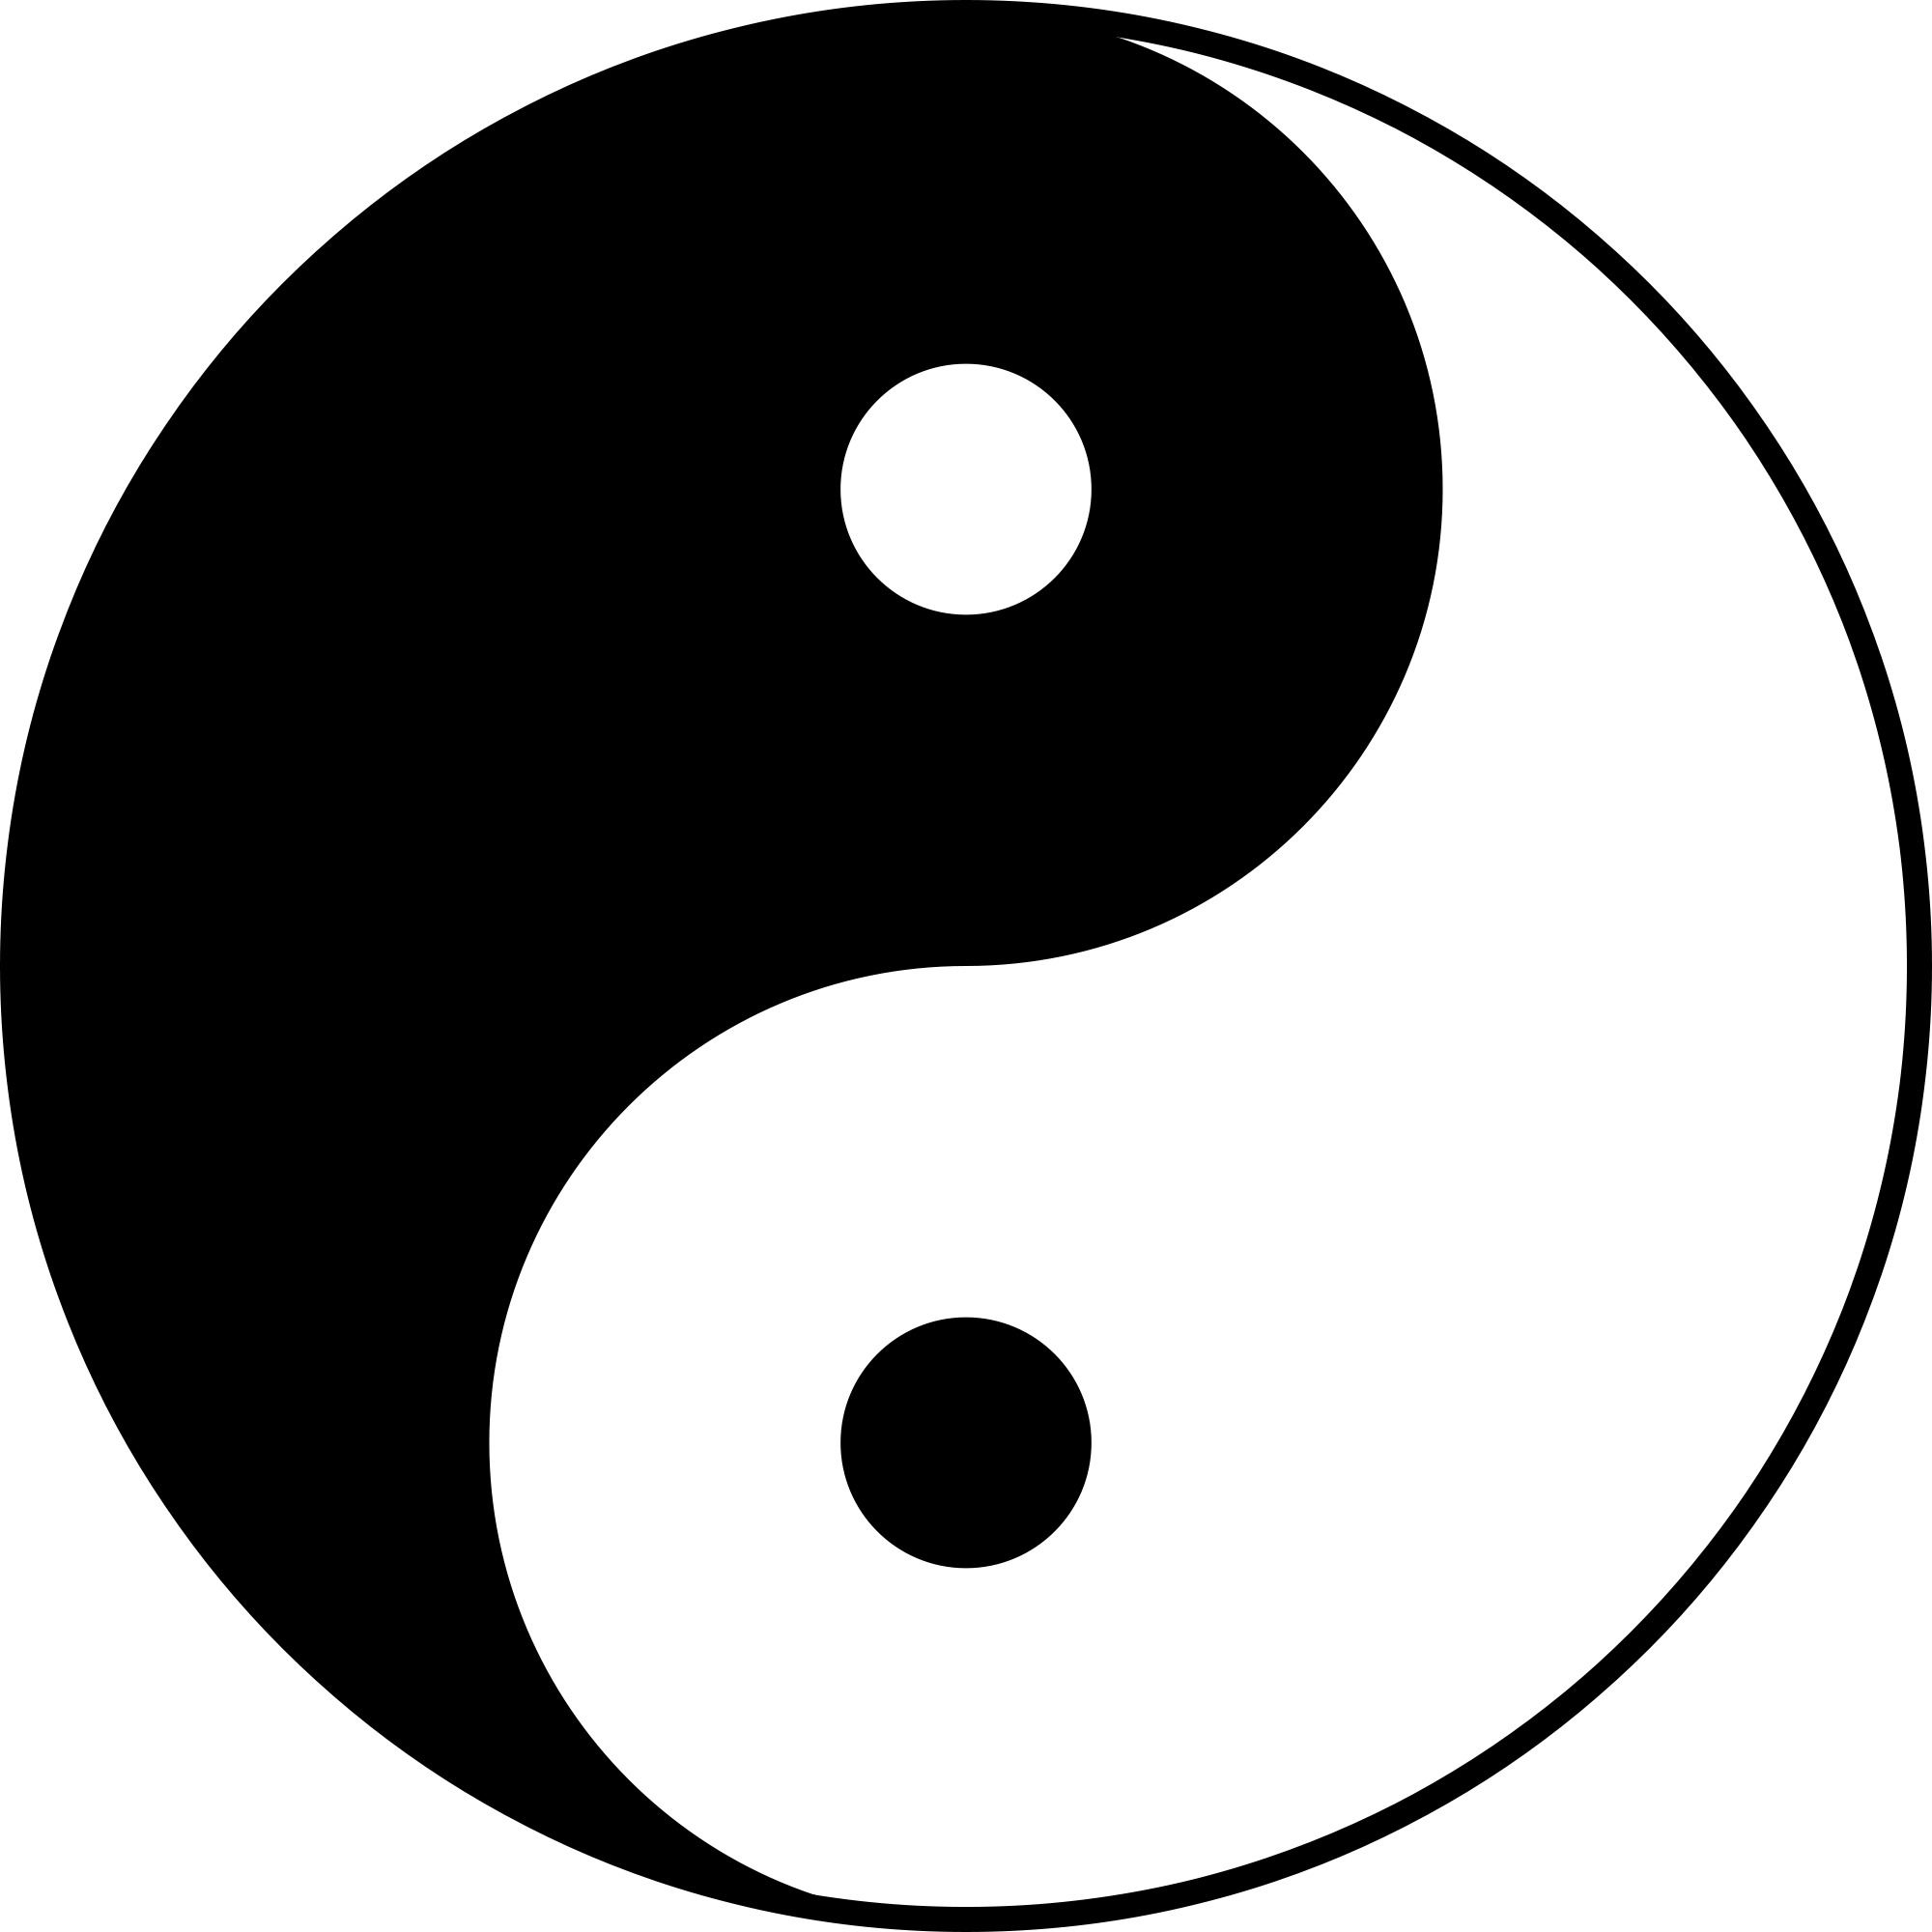 Yin and yang symbol outline - swimholden